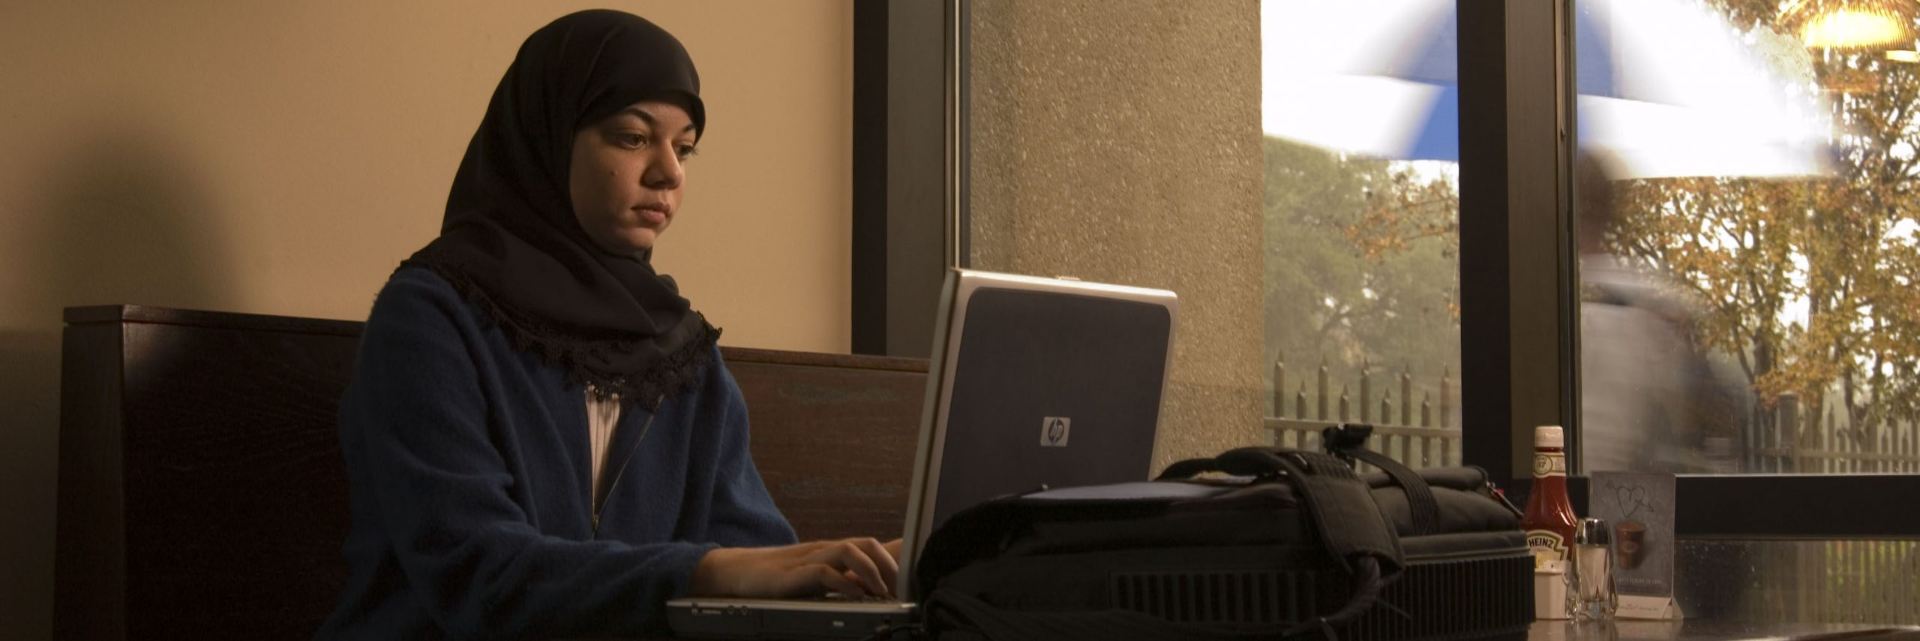 Woman working at computer
